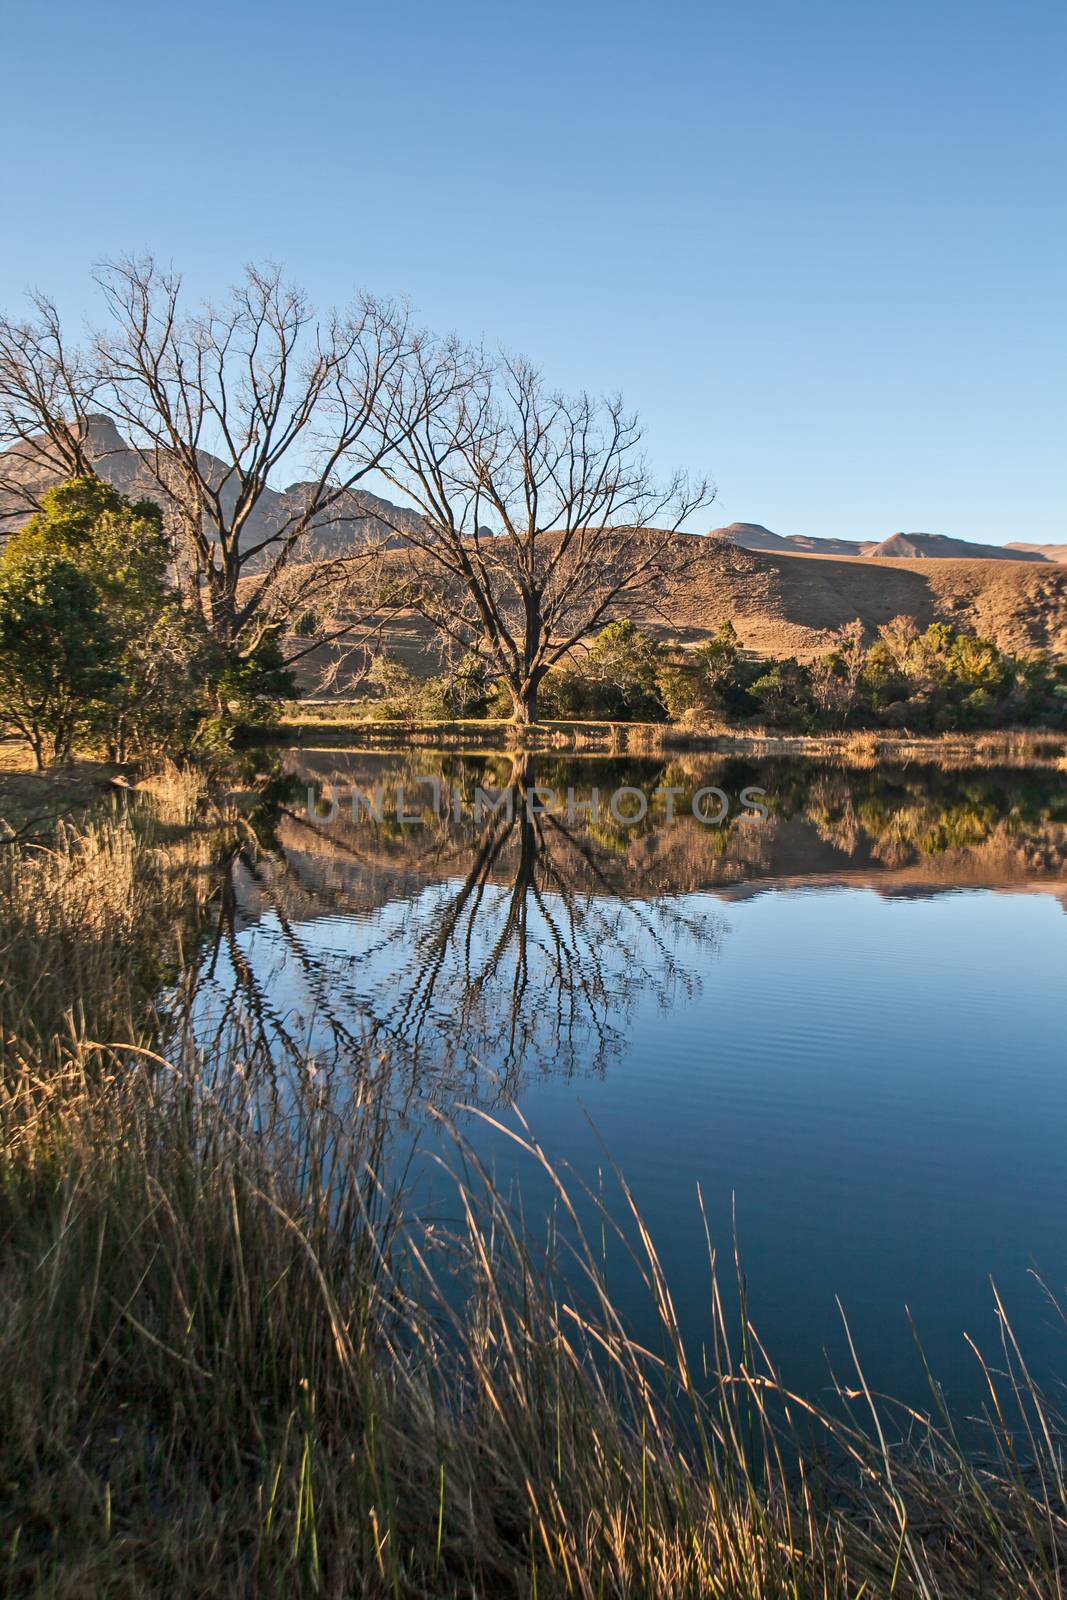 Scenic reflections in a Drakensberg lake 11056 by kobus_peche